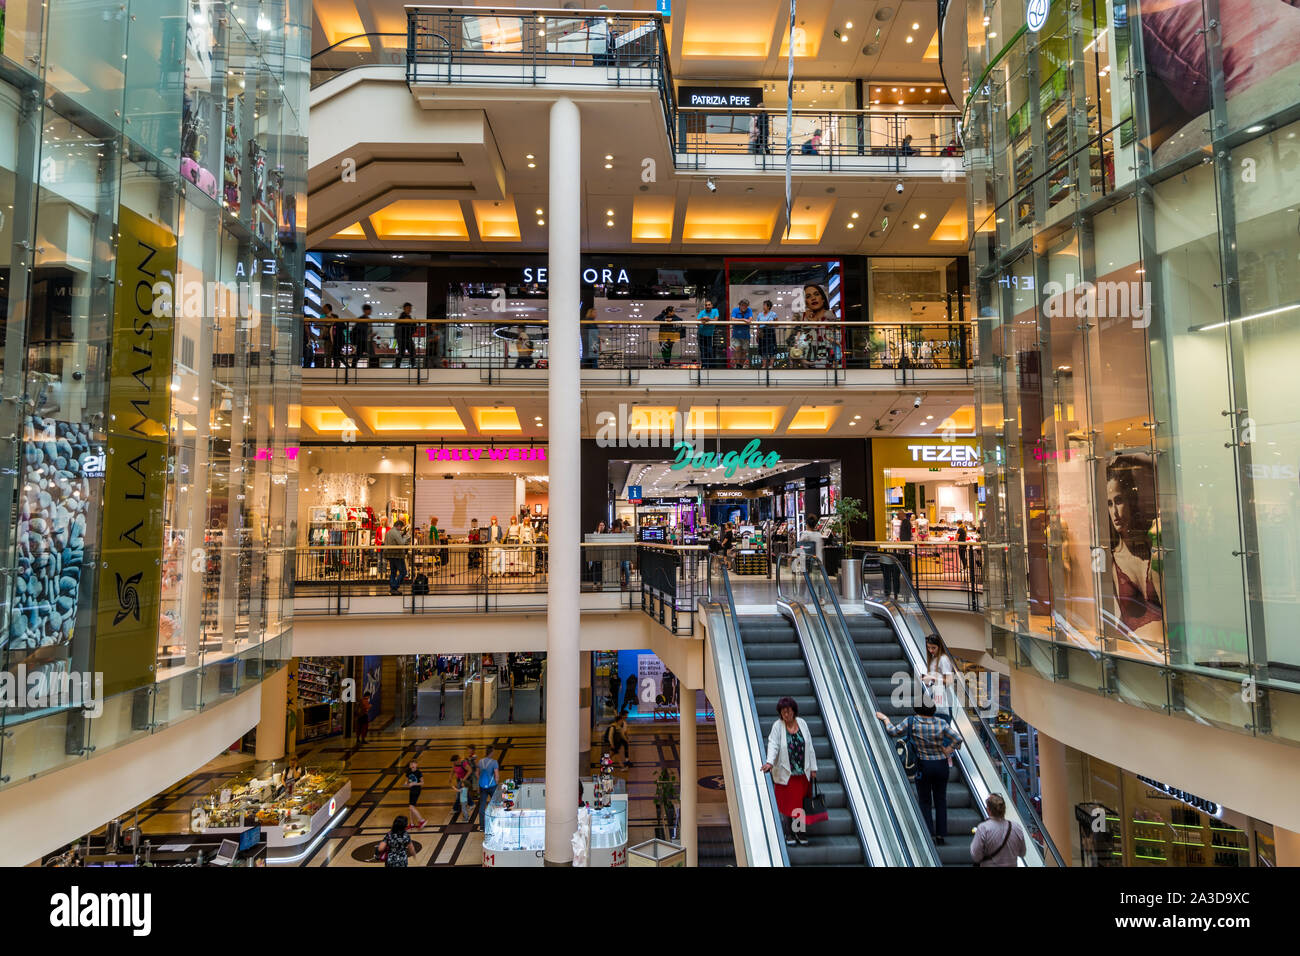 Palladium Mall High Resolution Stock Photography and Images - Alamy